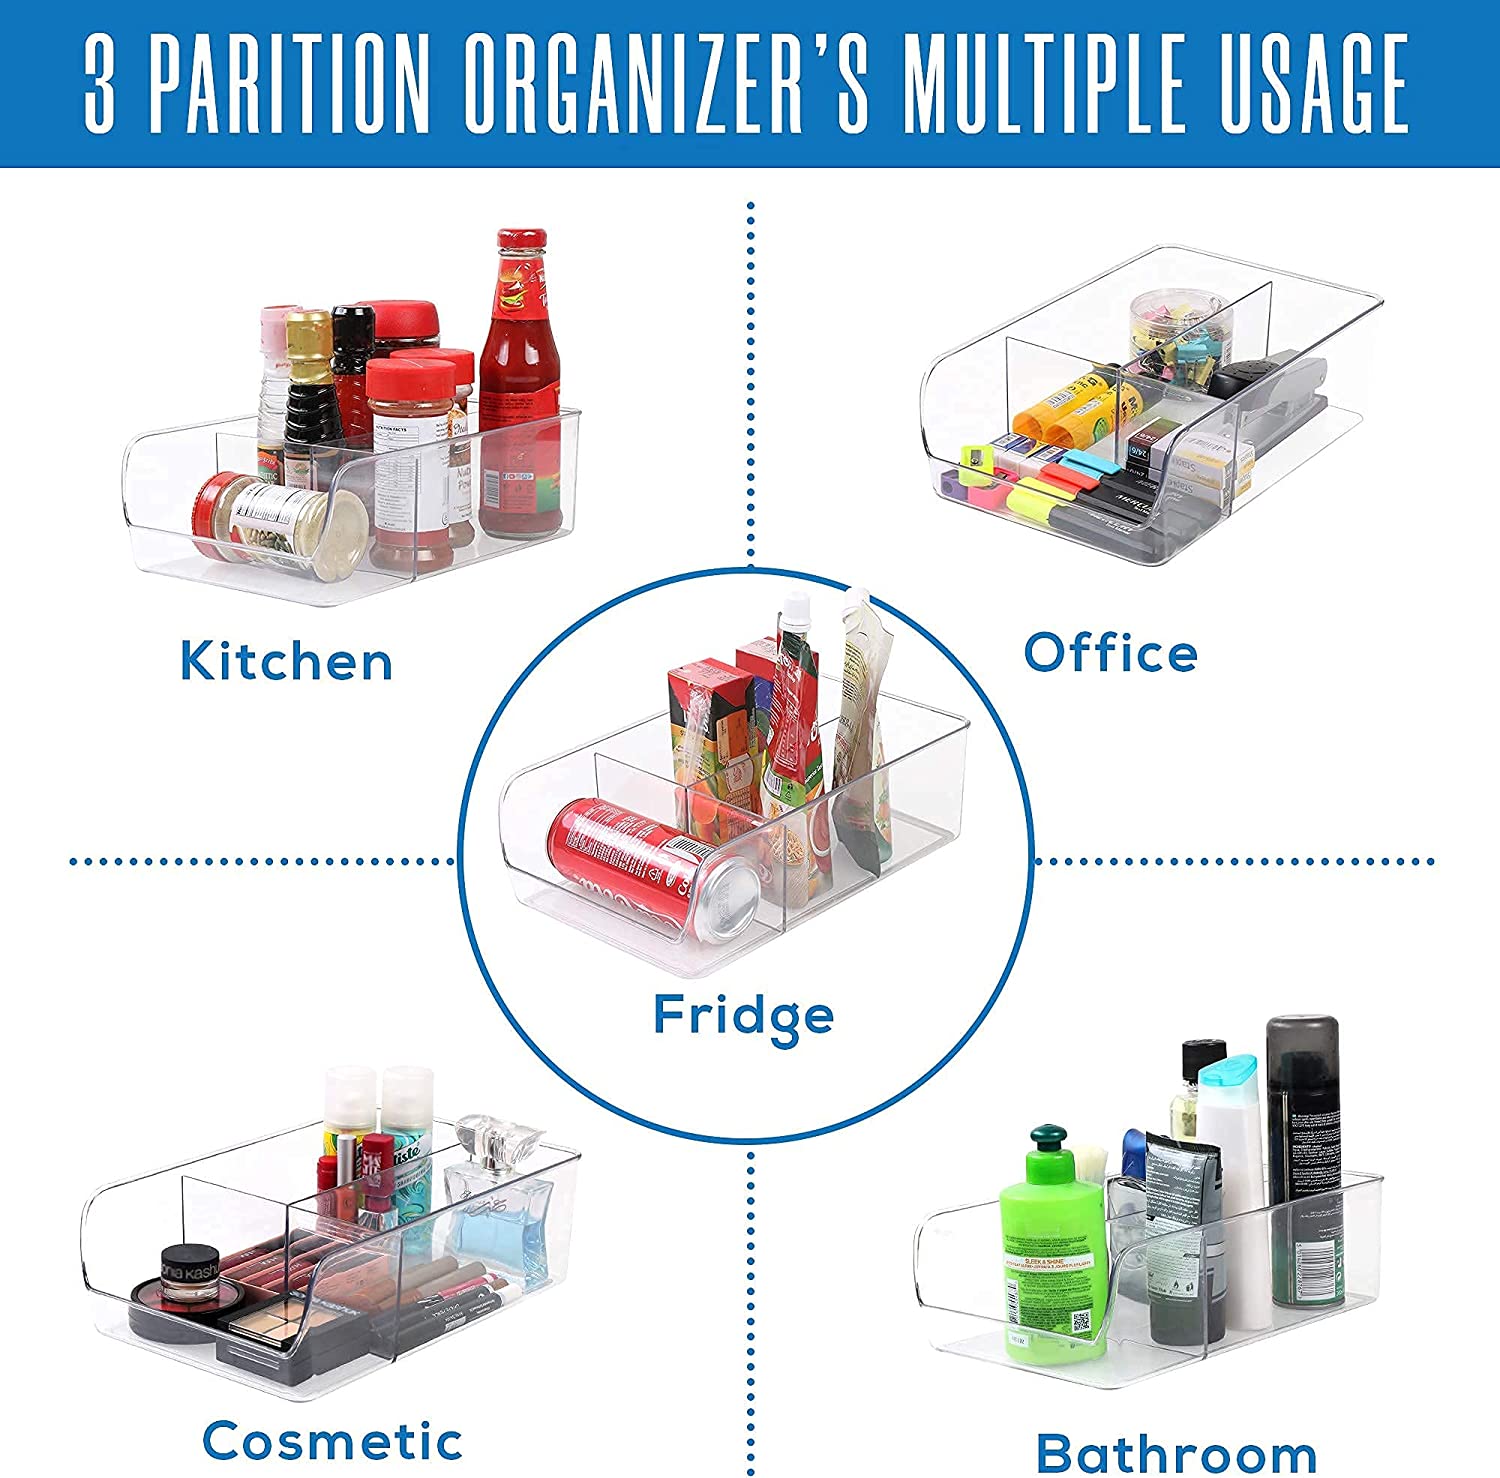 Cabinets-Clear Plastic Pantry Organizer - Big & Small by Utopia